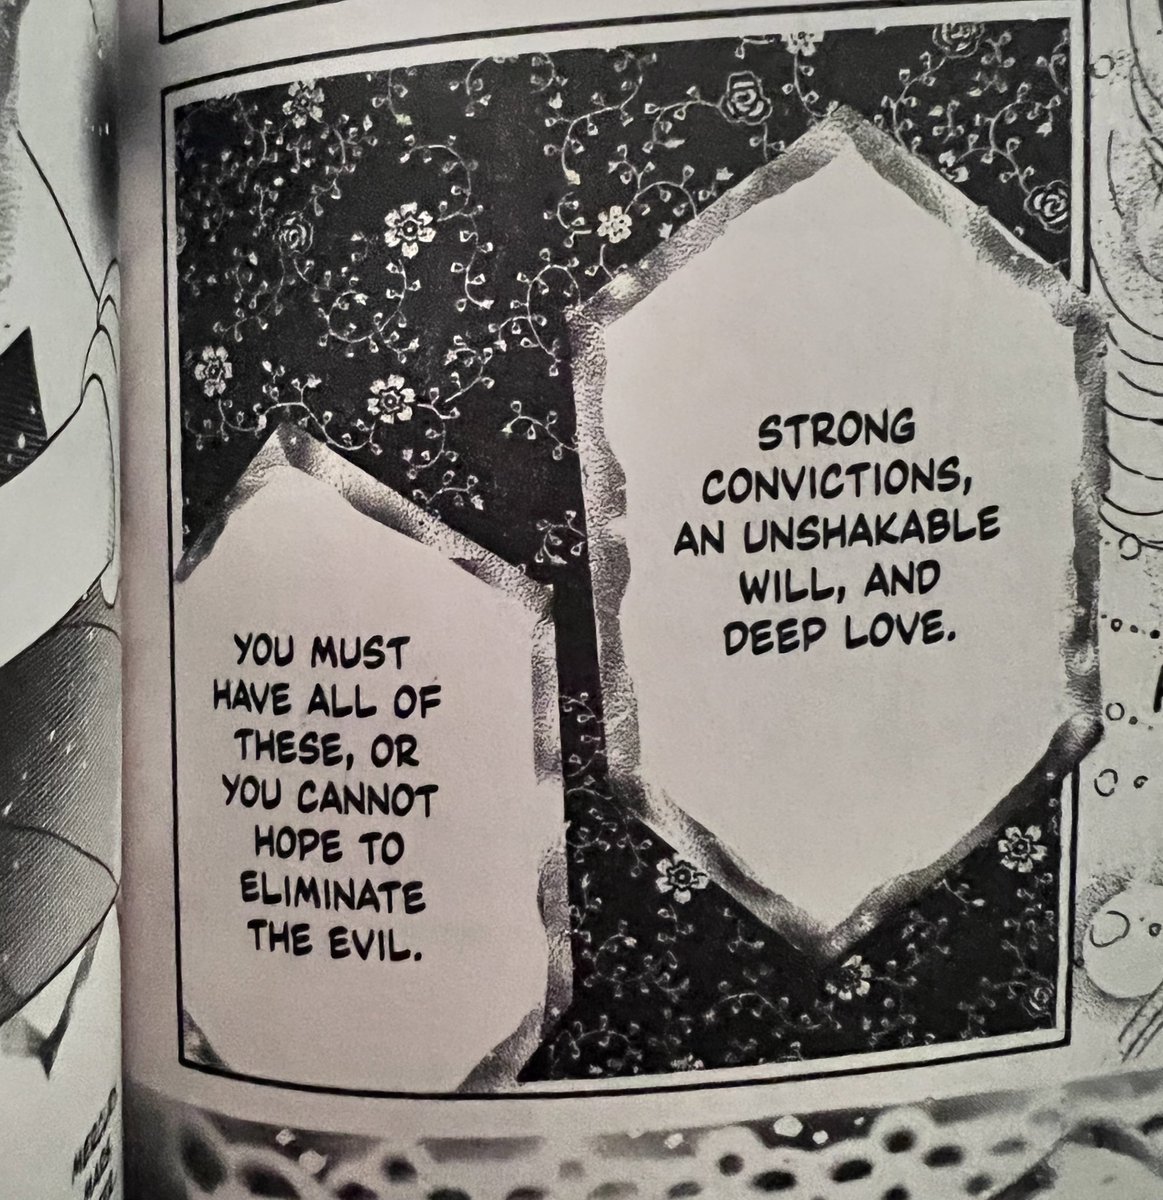 A snippet from the Sailor Moon manga. Sailor Moon was a positive influence in my younger days and even now. She taught me even a hot mess who has no idea what they're  doing can accomplish great things with love and help from their friends. 🌙 